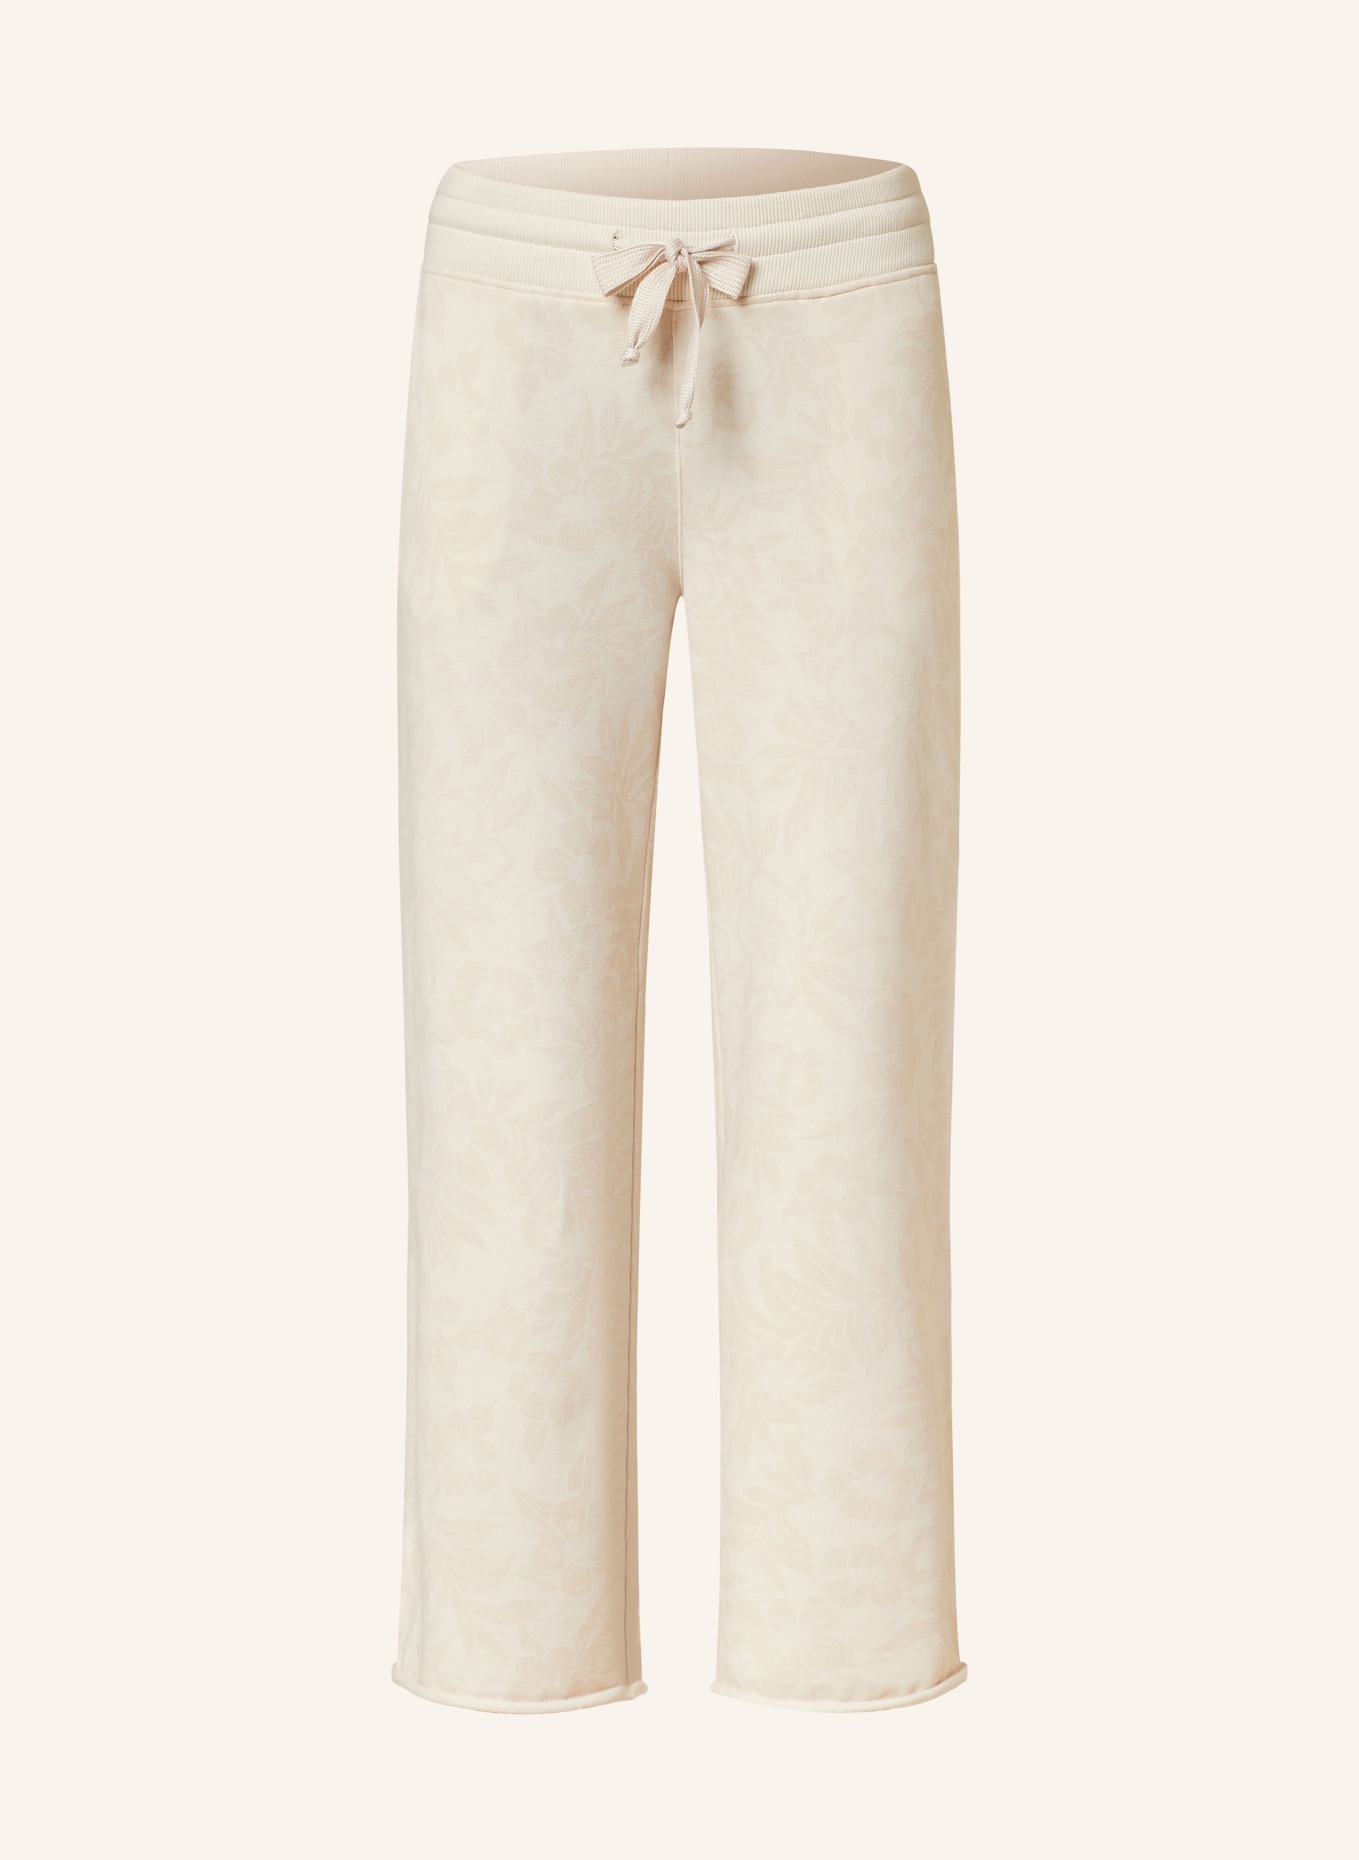 Juvia 7/8 pants MERLE in jogger style, Color: CREAM (Image 1)